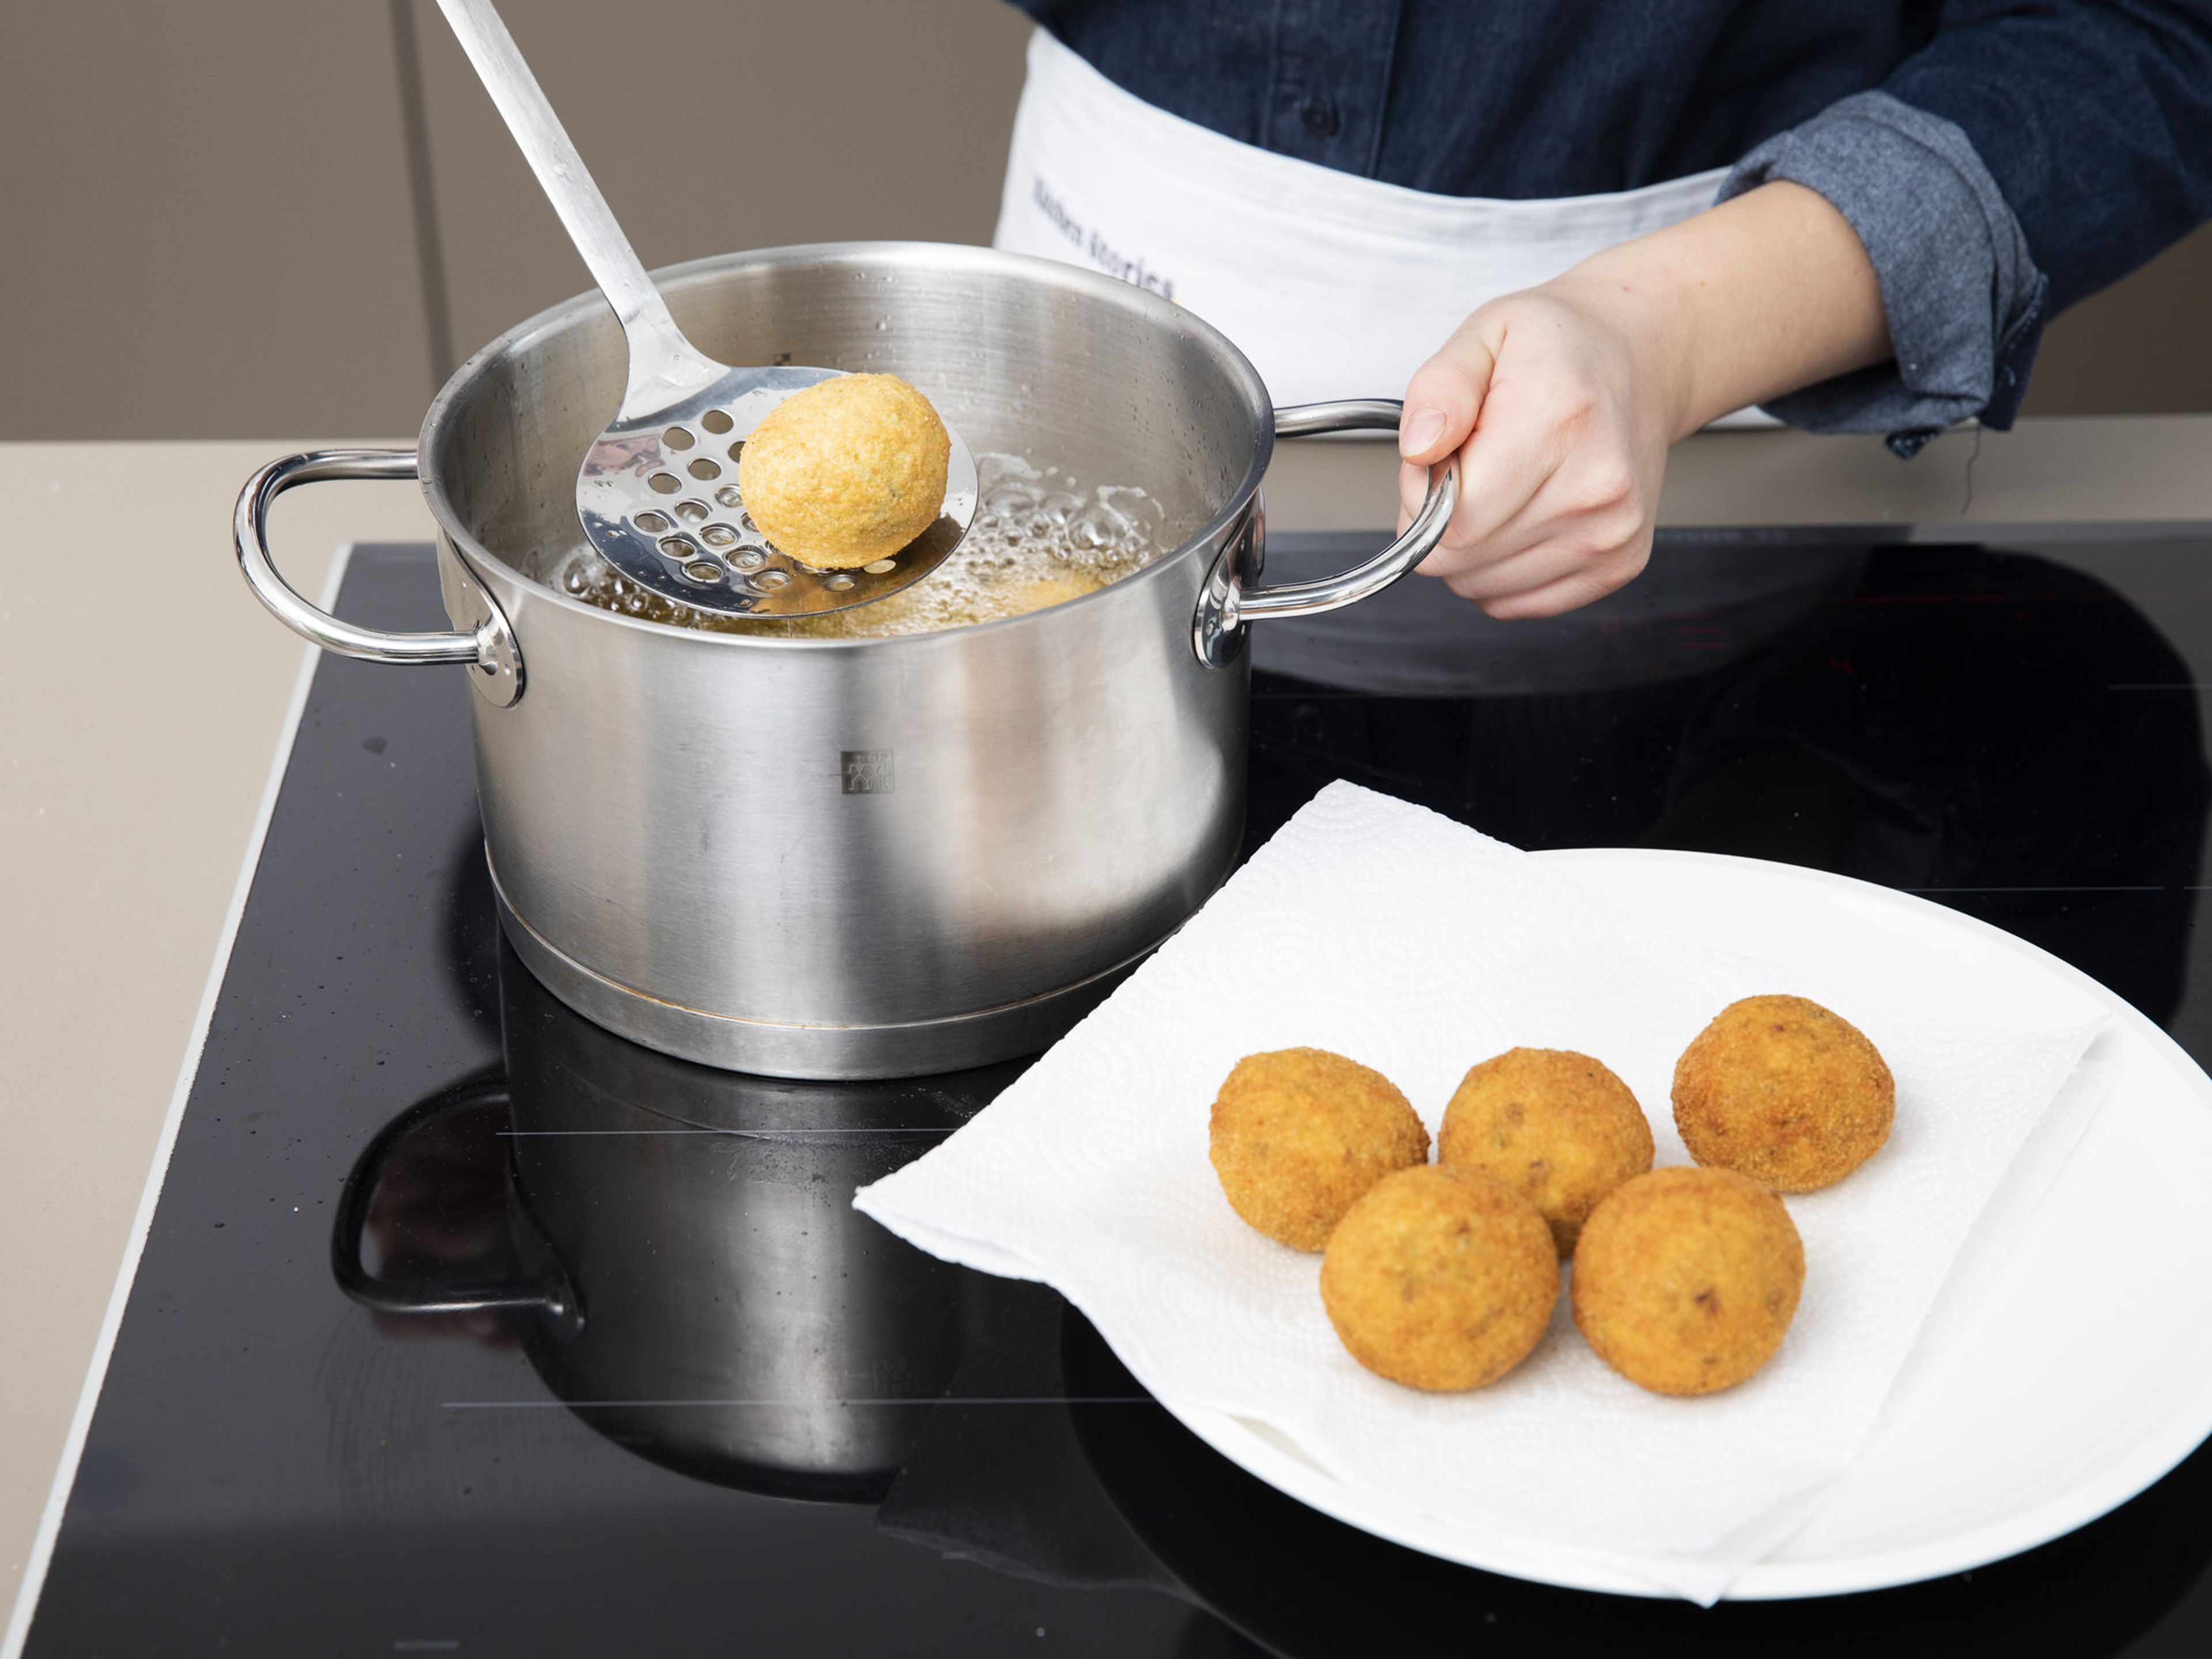 Heat vegetable oil in a small pot until it’s approx 180°C/350°F. Add arancini in batches and deep-fry until crispy and golden brown, approx. 6–7 min. Transfer to a paper towel to drain. Serve warm with Marinara sauce for dipping.